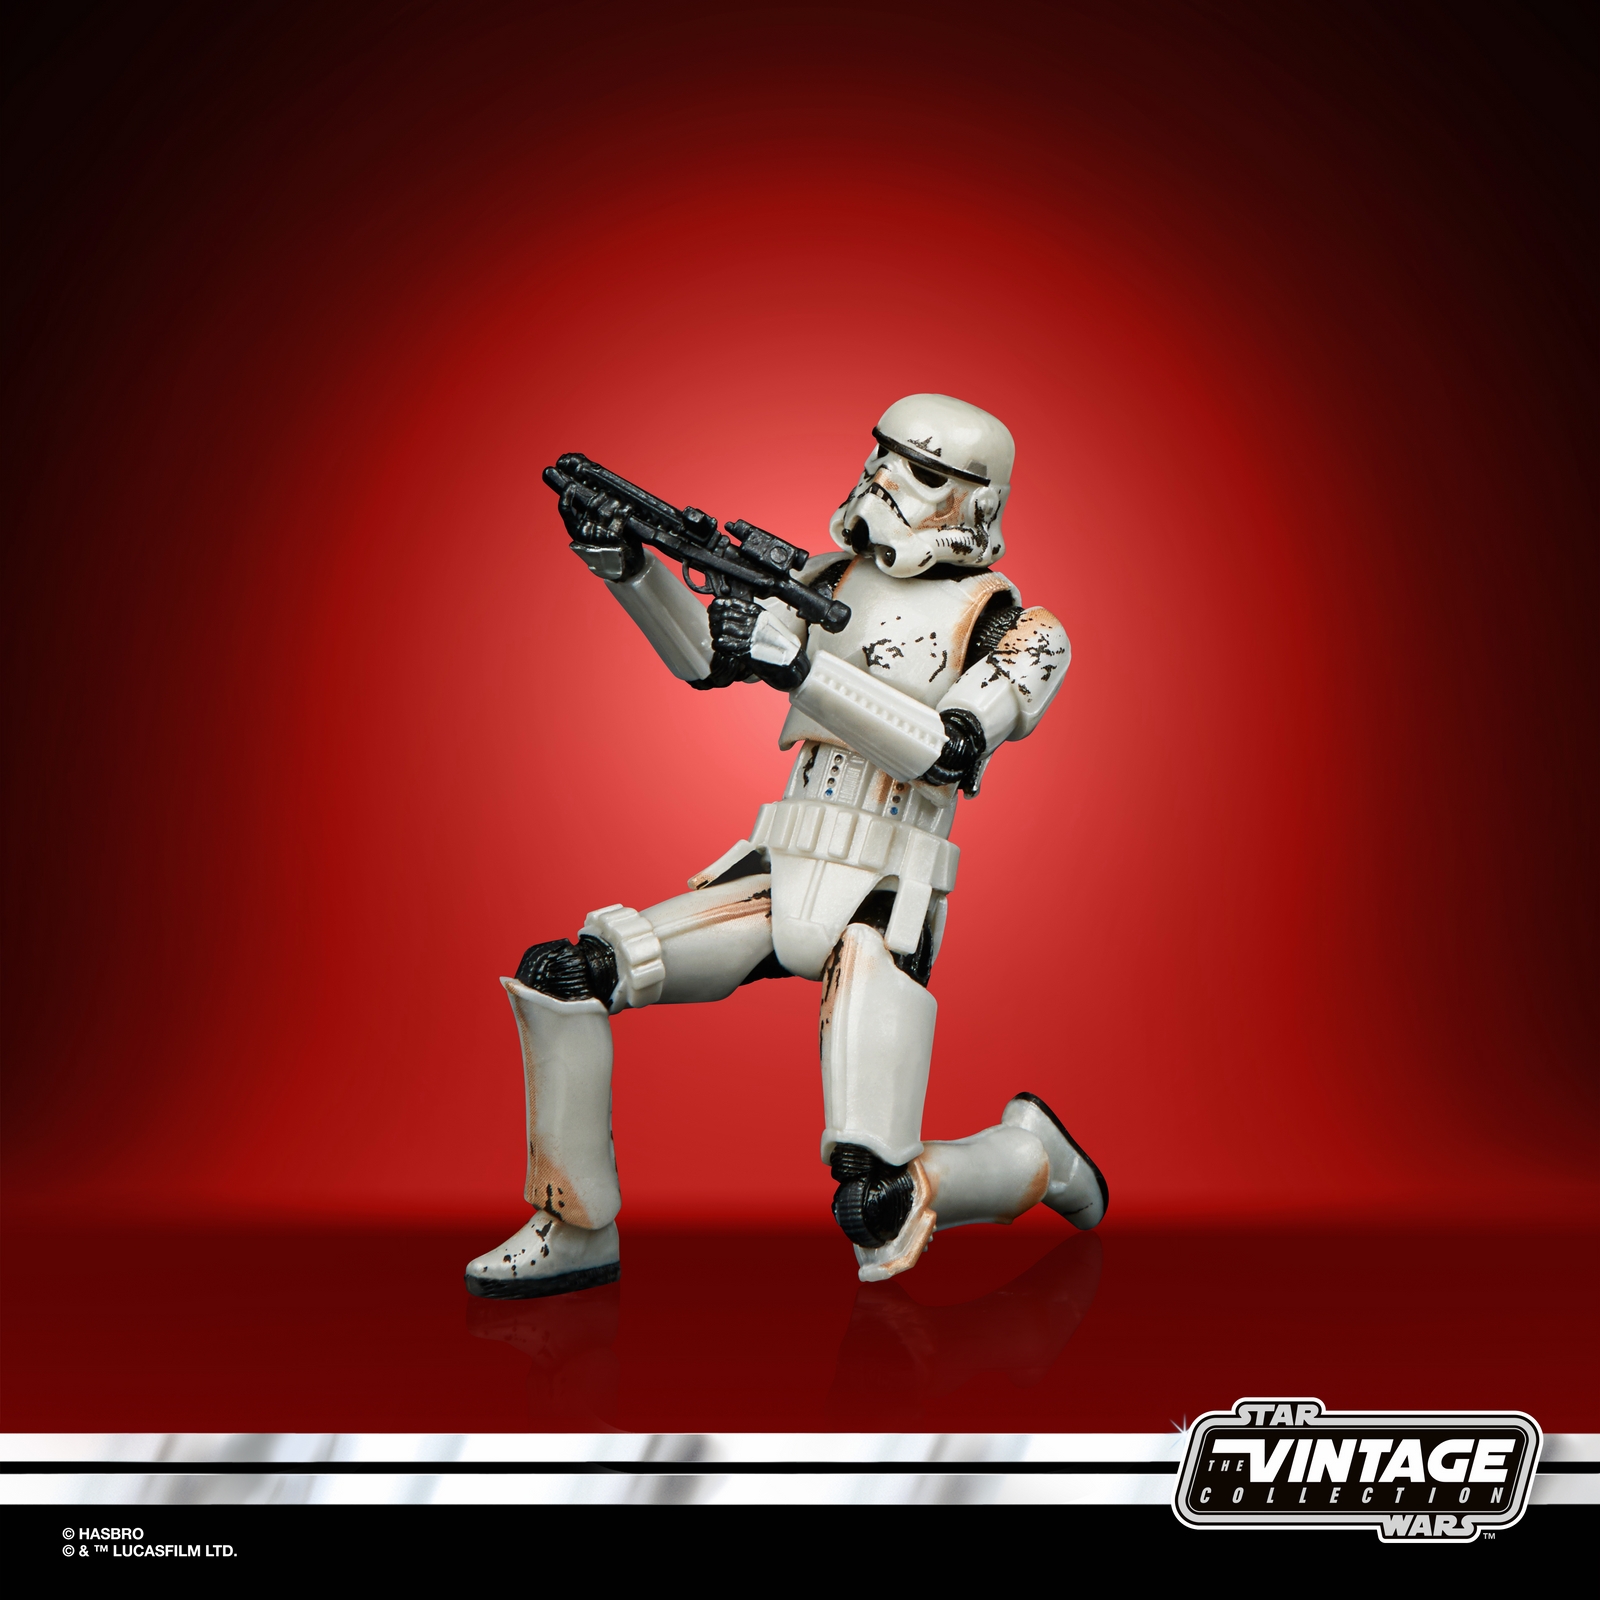 STAR WARS THE VINTAGE COLLECTION CARBONIZED COLLECTION 3.75-INCH REMNANT TROOPER oop 4.jpg